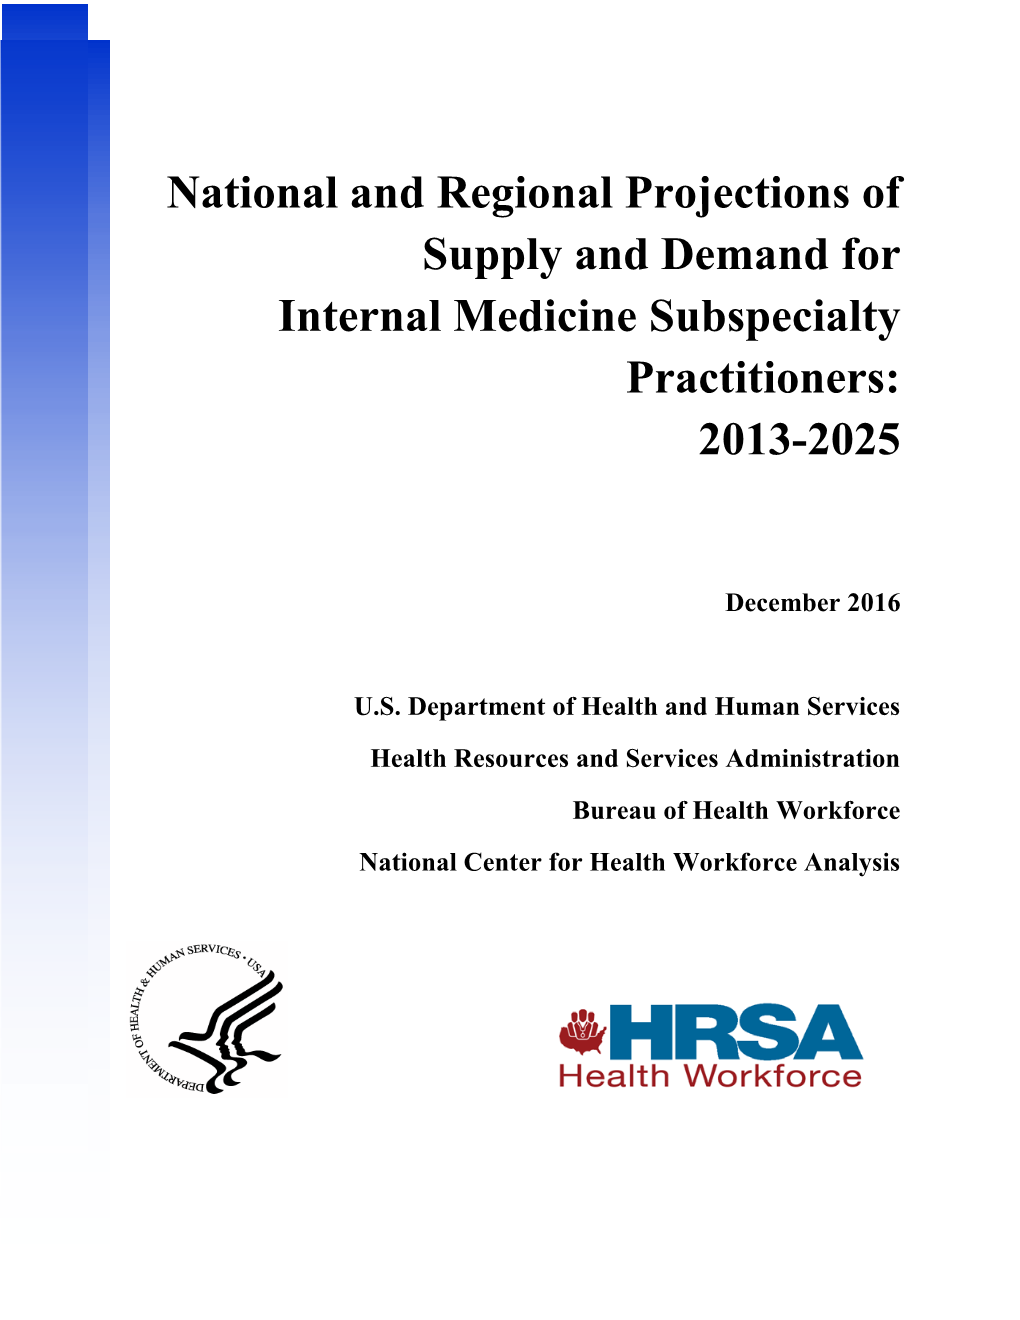 National and Regional Projections of Supply and Demand for Internal Medicine Subspecialty Practitioners: 2013-2025